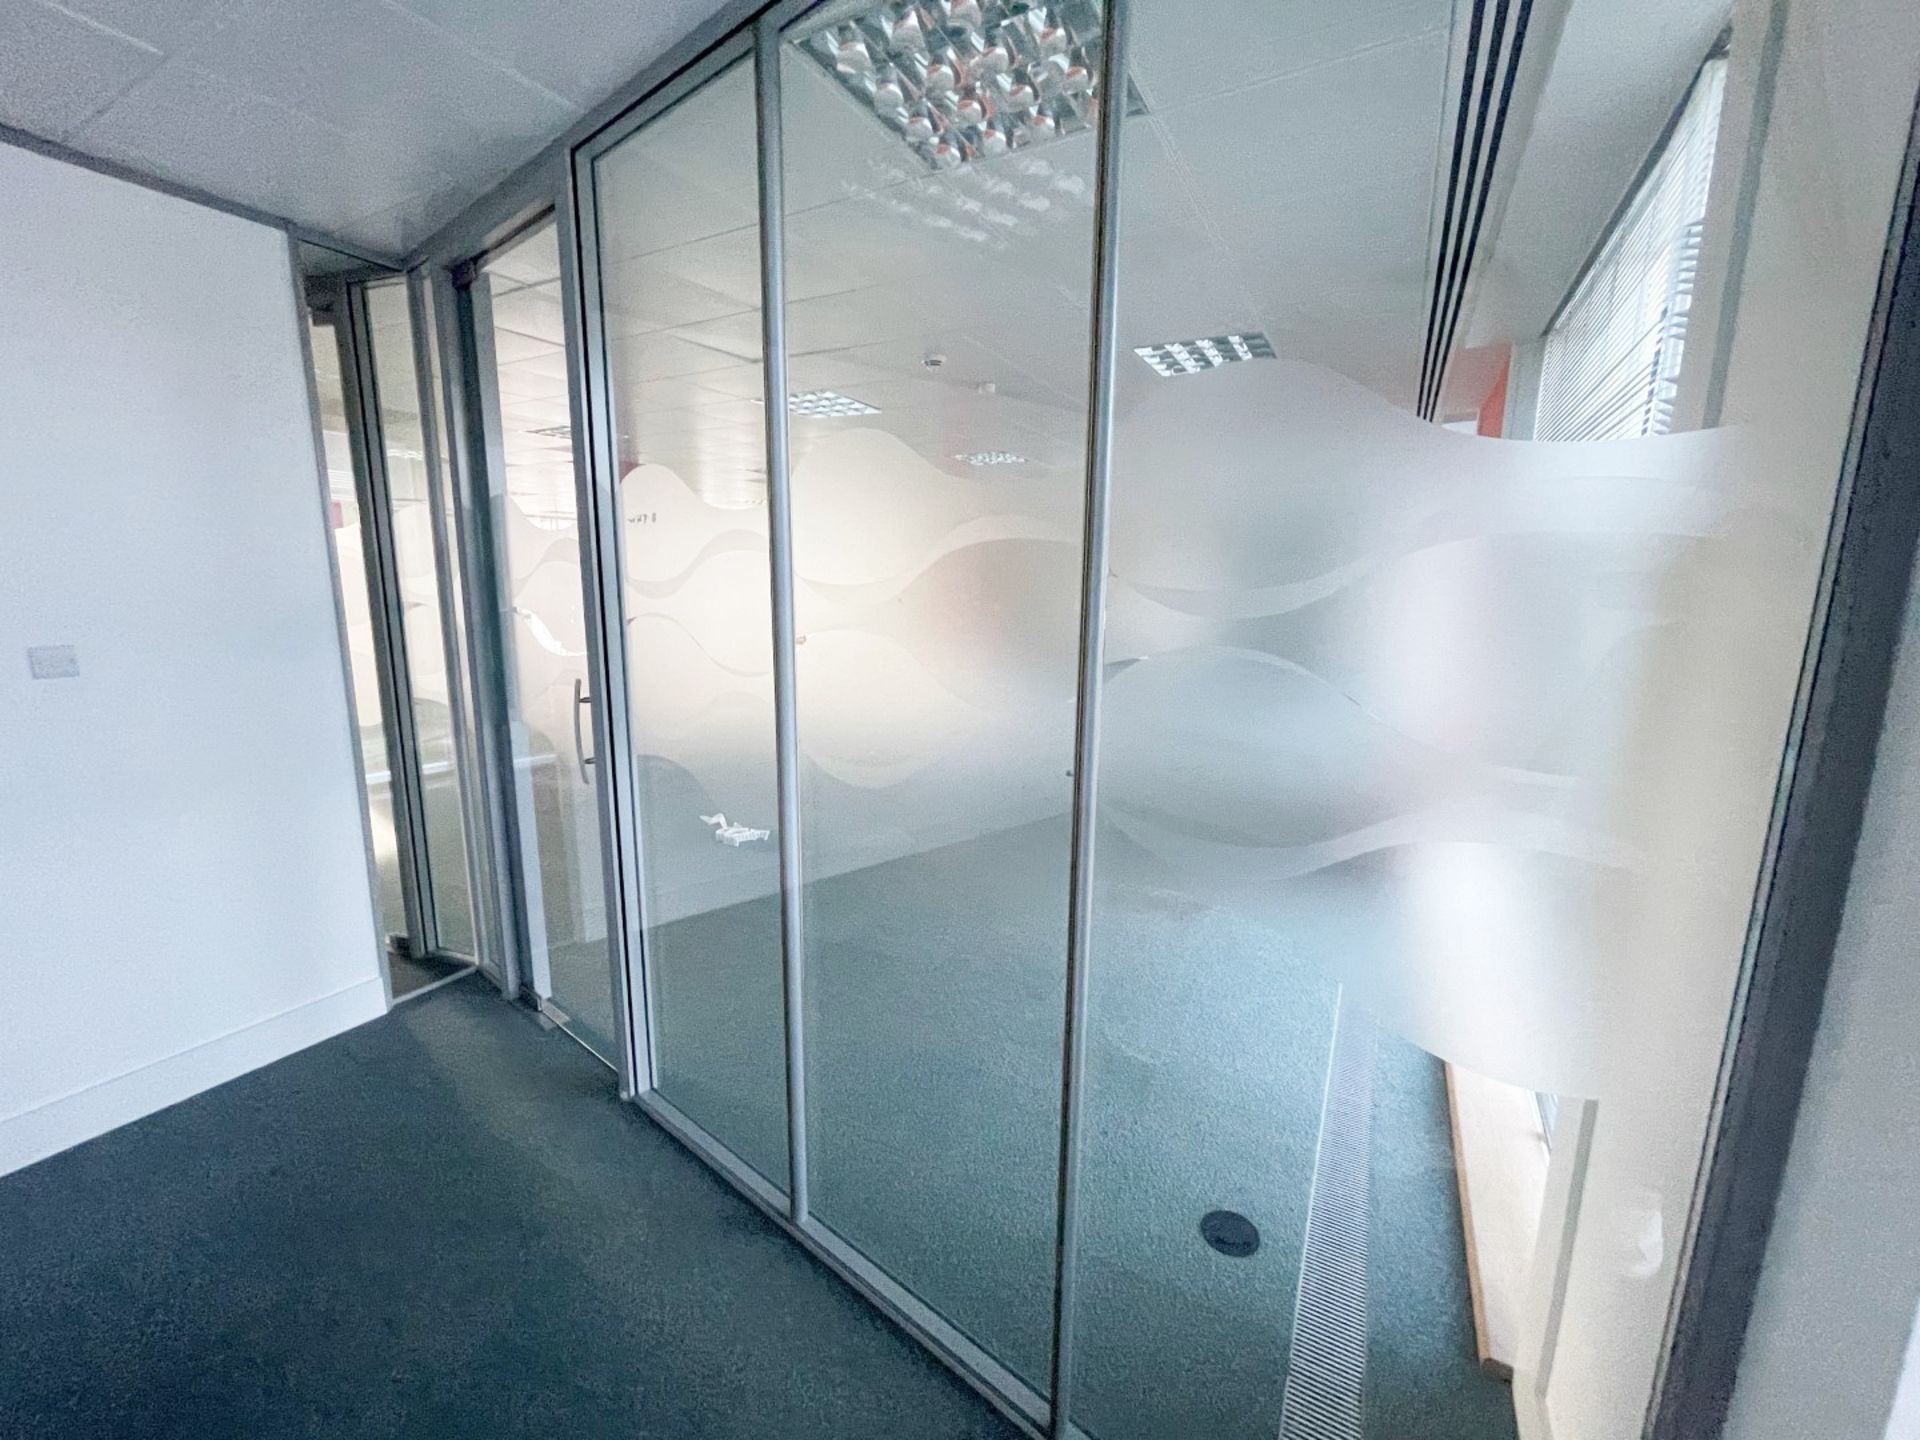 12 x Assorted Glass Partition Panels And Doors - Covers An Area Of 7.3 Metres Across, Height - Image 6 of 7